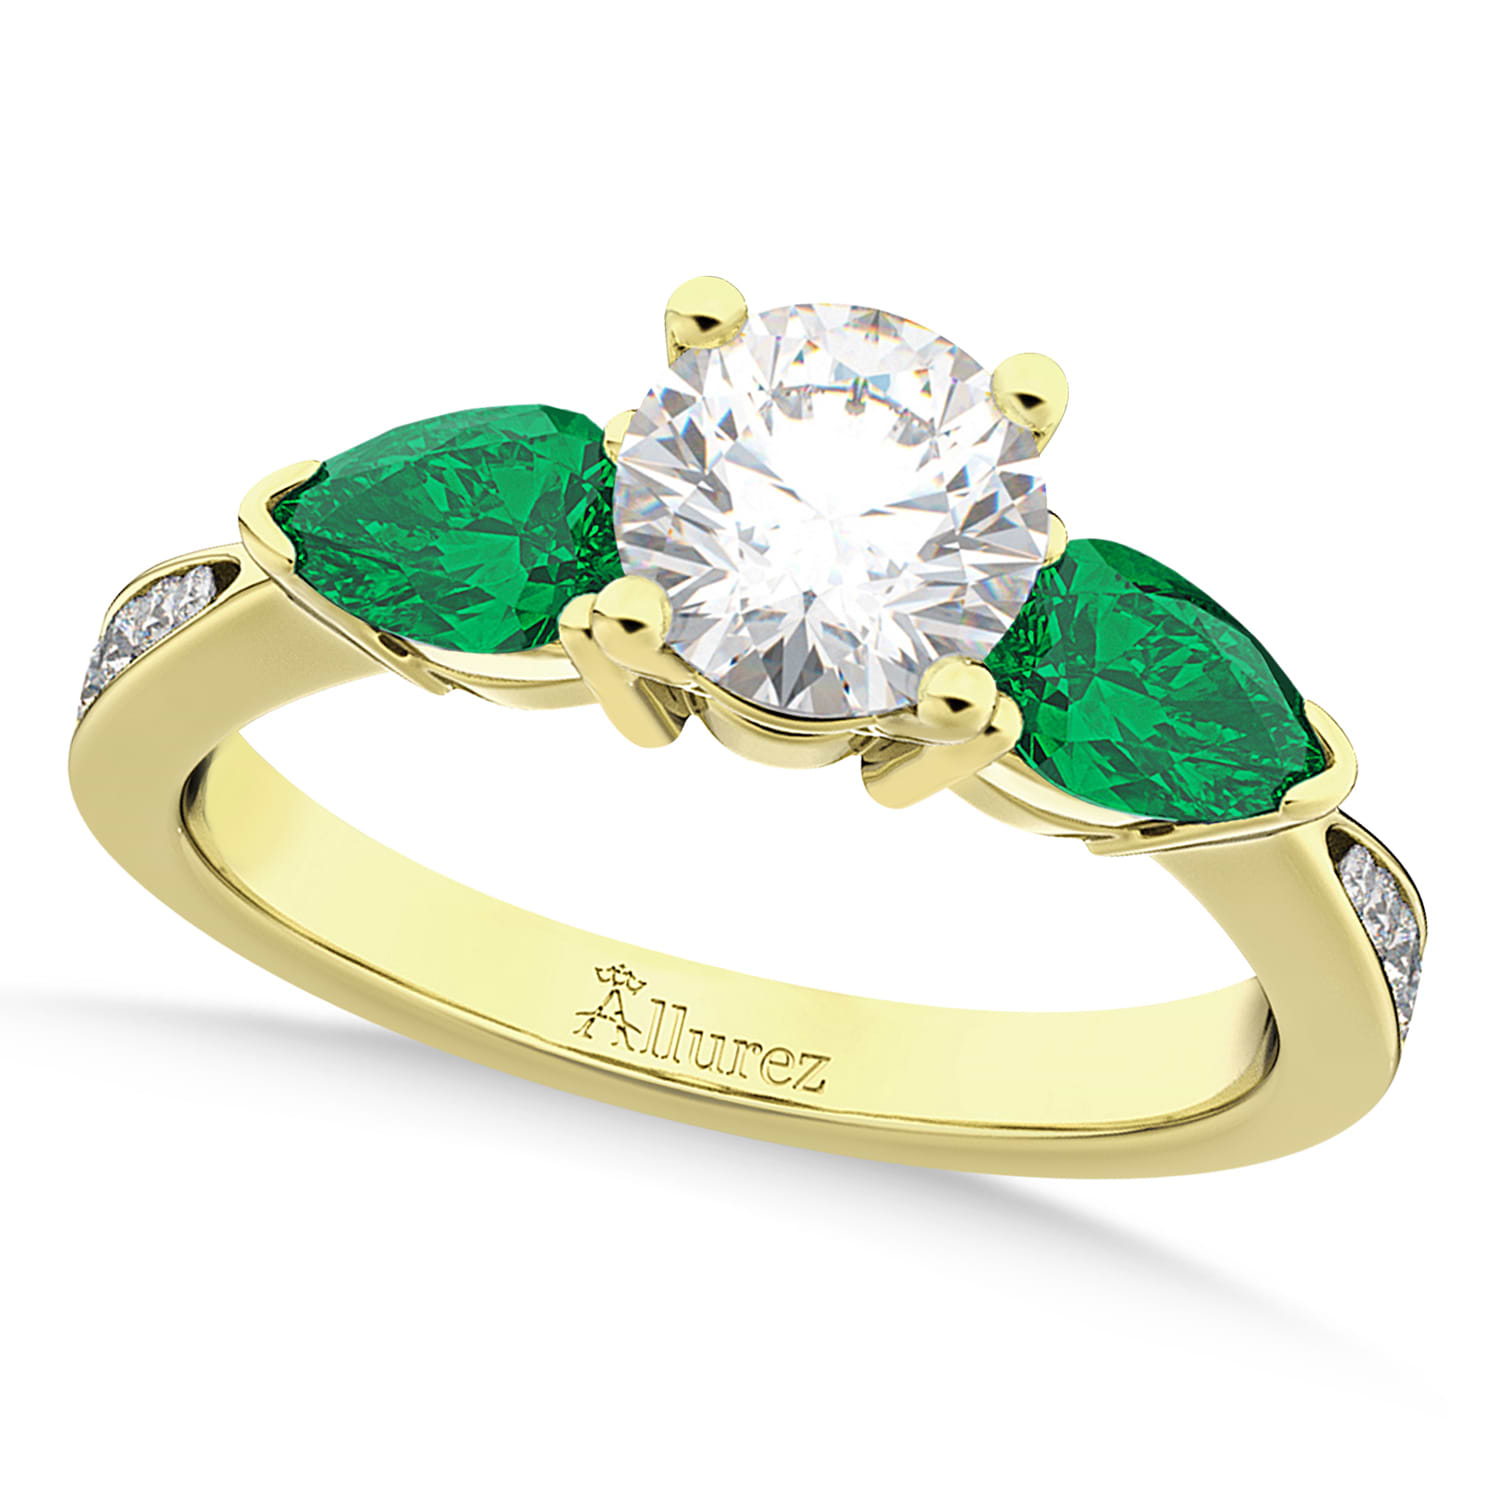 Round Diamond & Pear Green Emerald Engagement Ring 14k Yellow Gold (1.79ct)